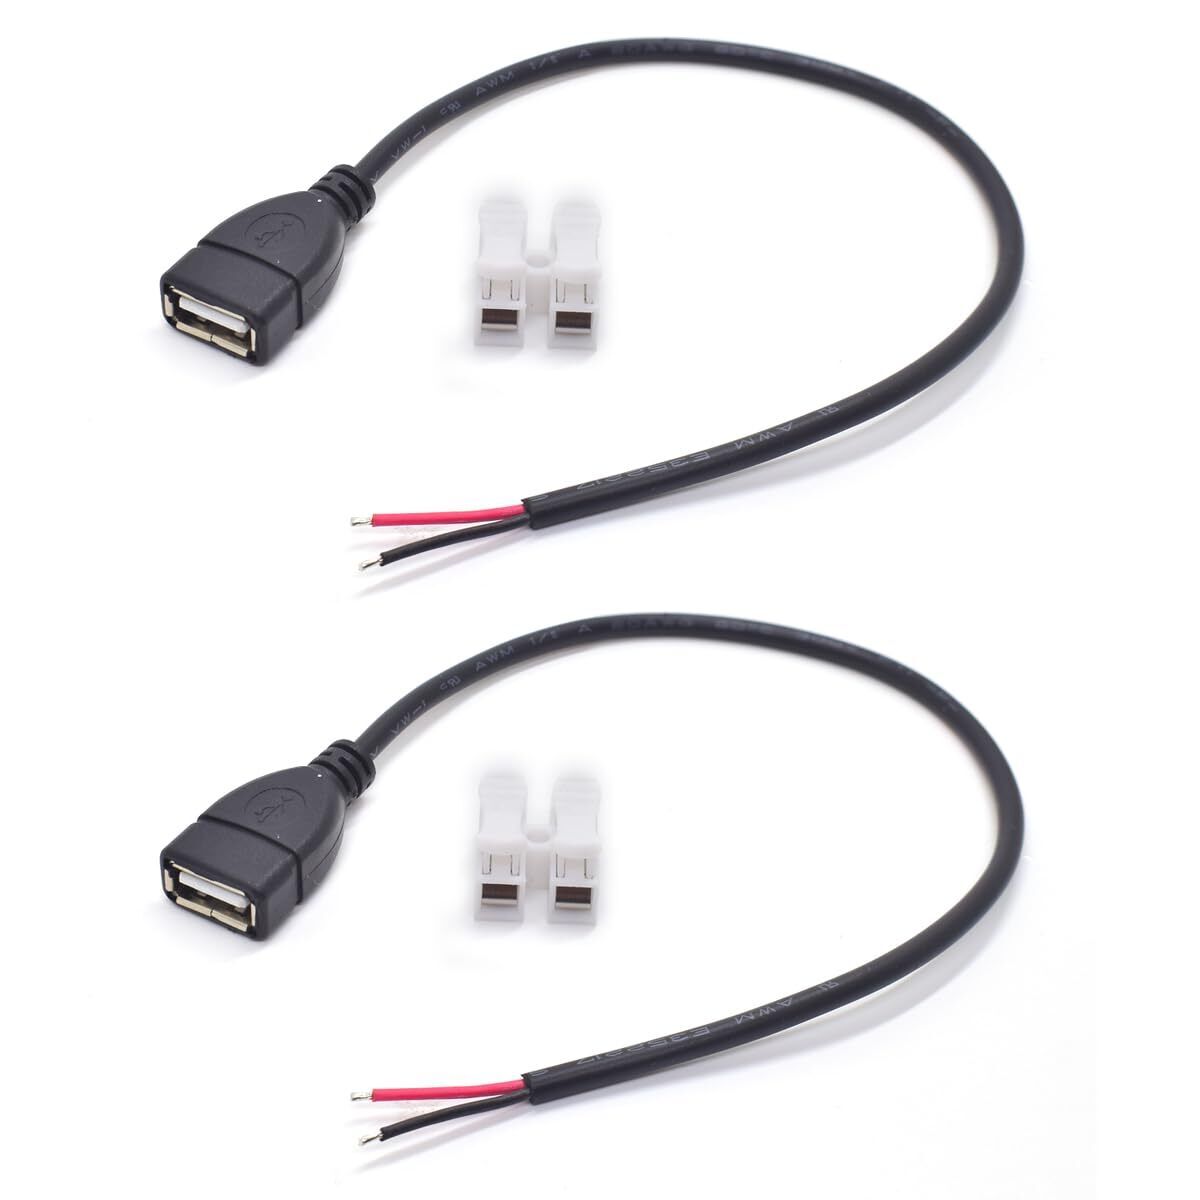 2PCS 0.3M/1FT USB 2.0 Female Pigtail 2 Wire 20AWG USB Female Plug to Bare Wir...